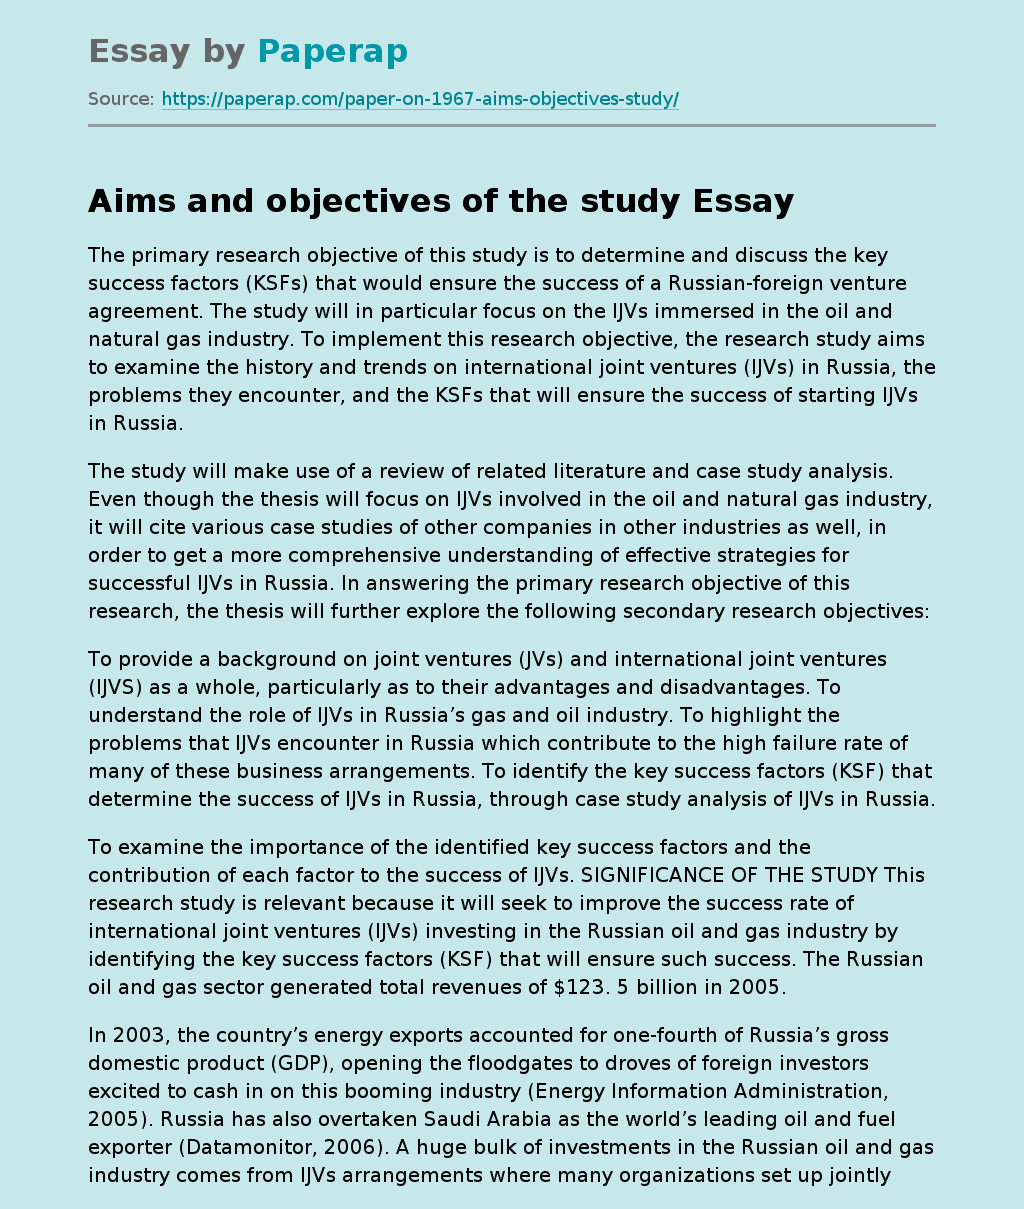 Aims and objectives of the study